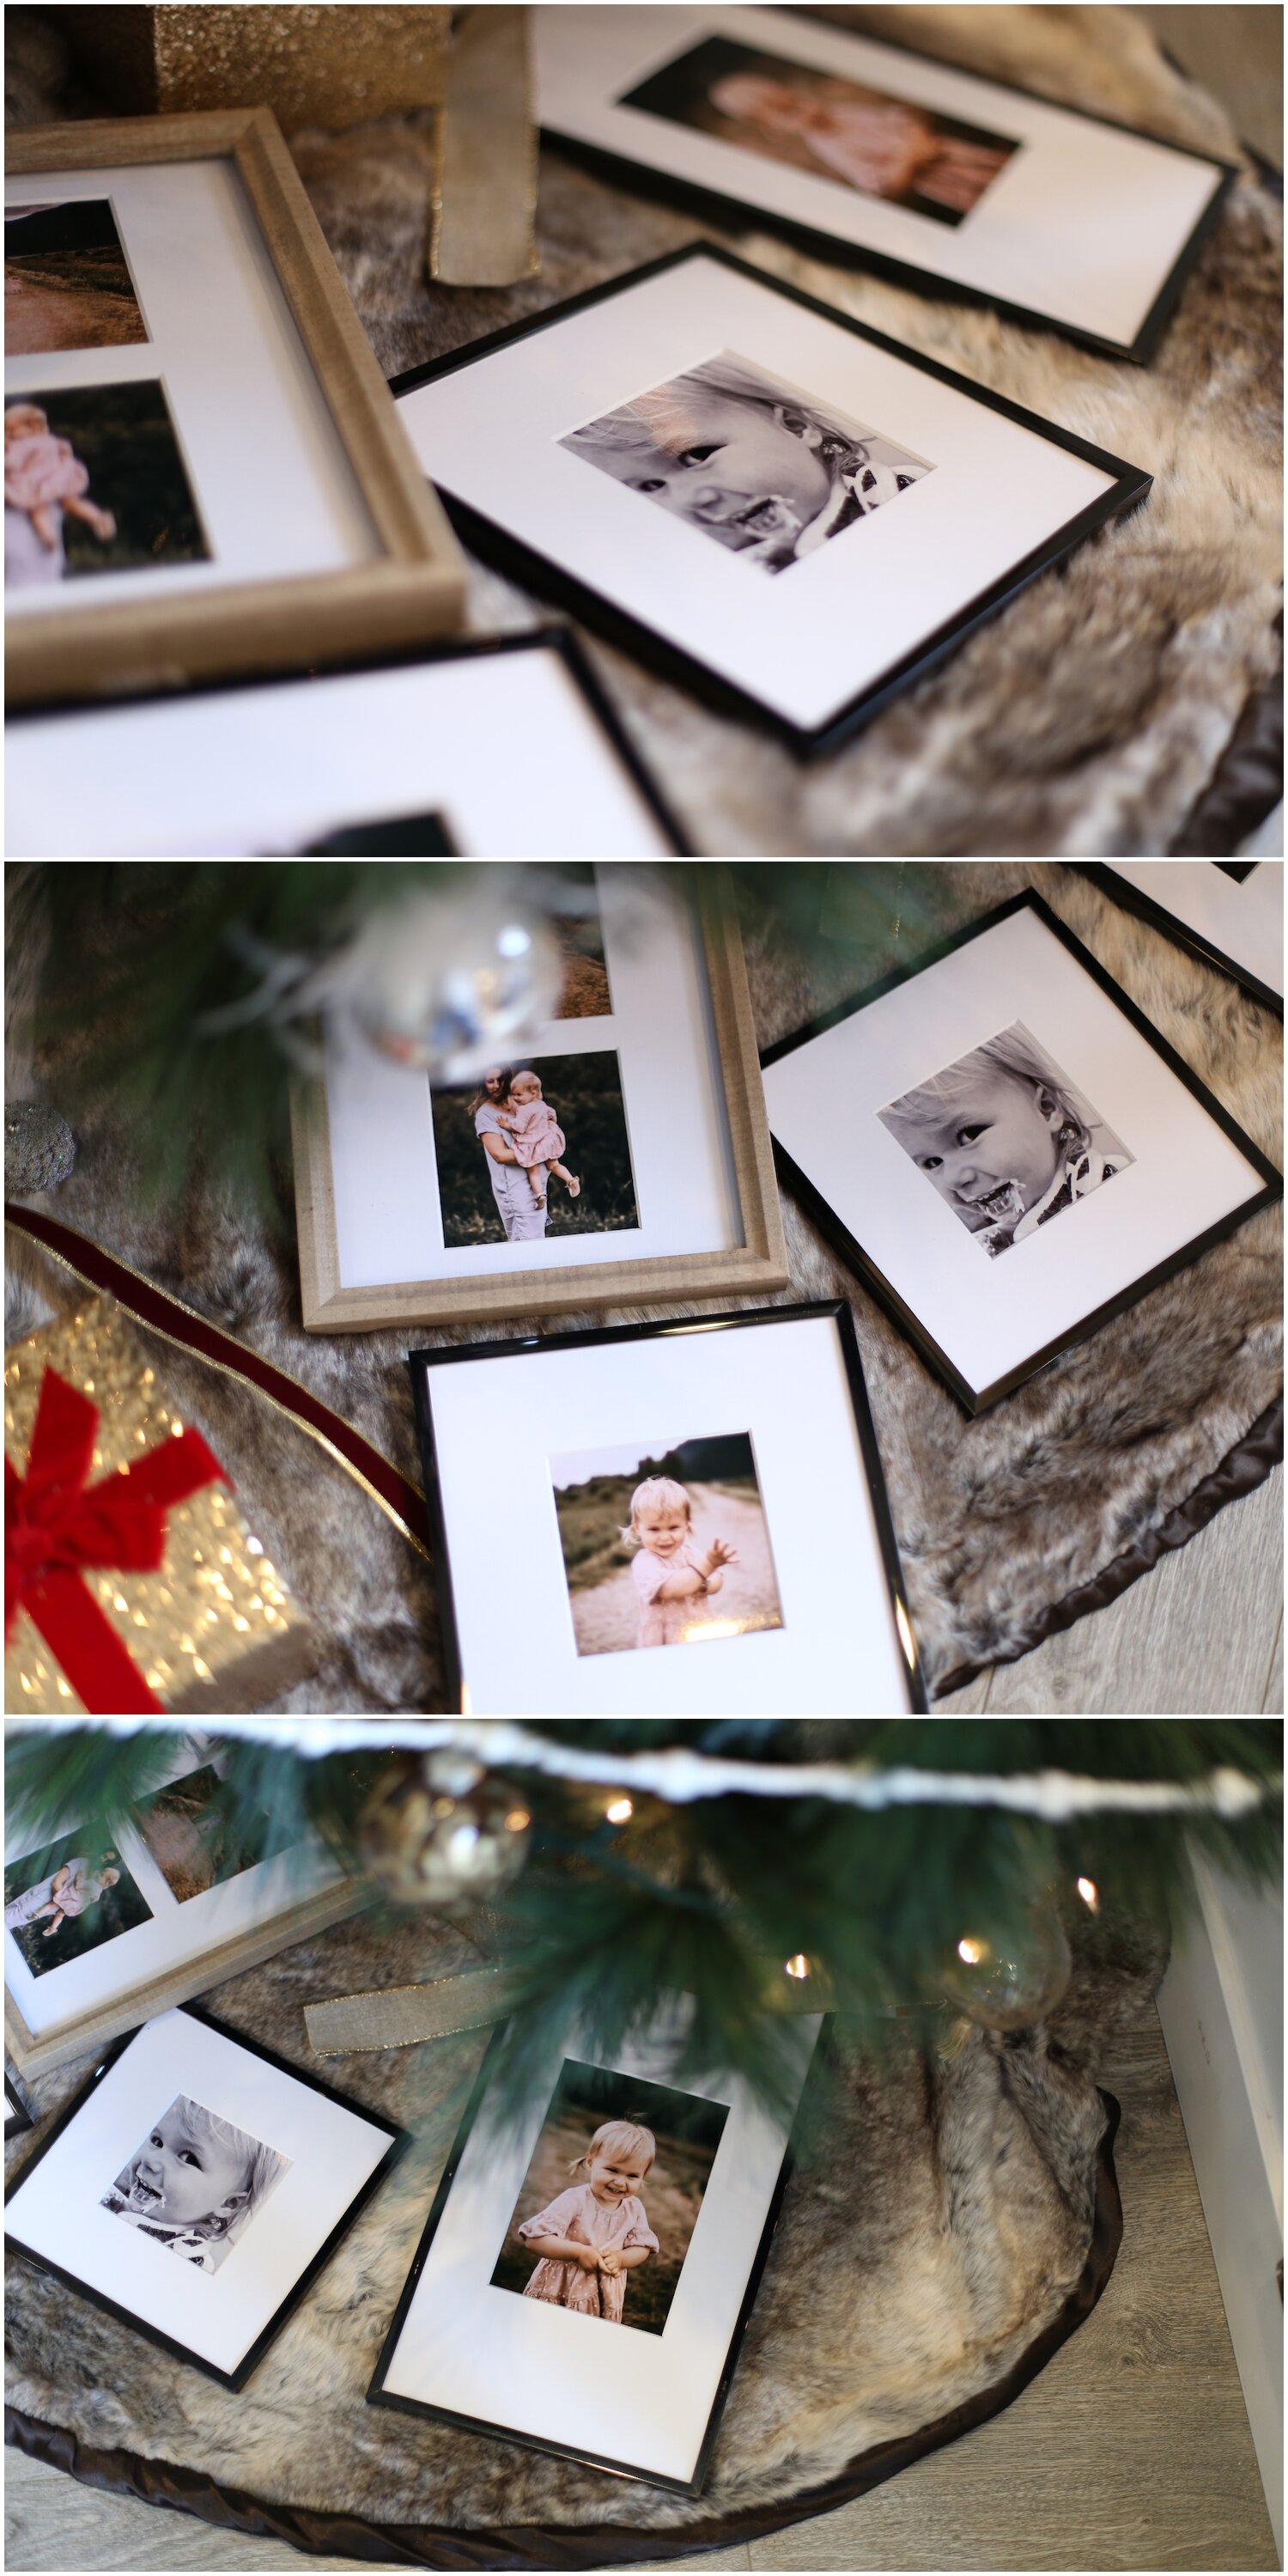 FREE GALLERY WALL TEMPLATE: OVERSIZED MAT SQUARE FRAMES — KENDRA